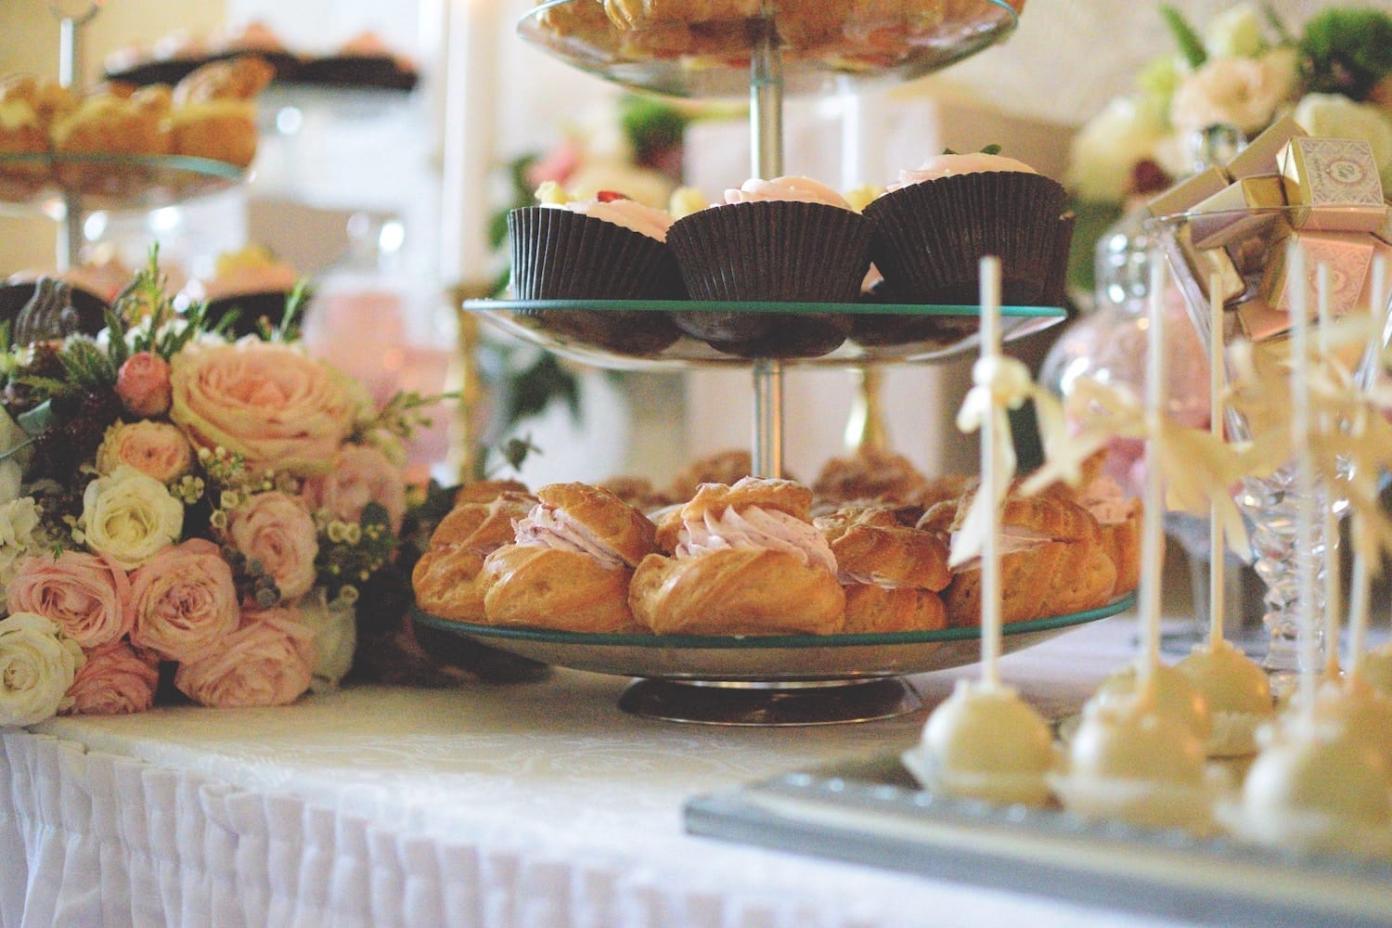 How Much Does Wedding Catering Typically Cost?